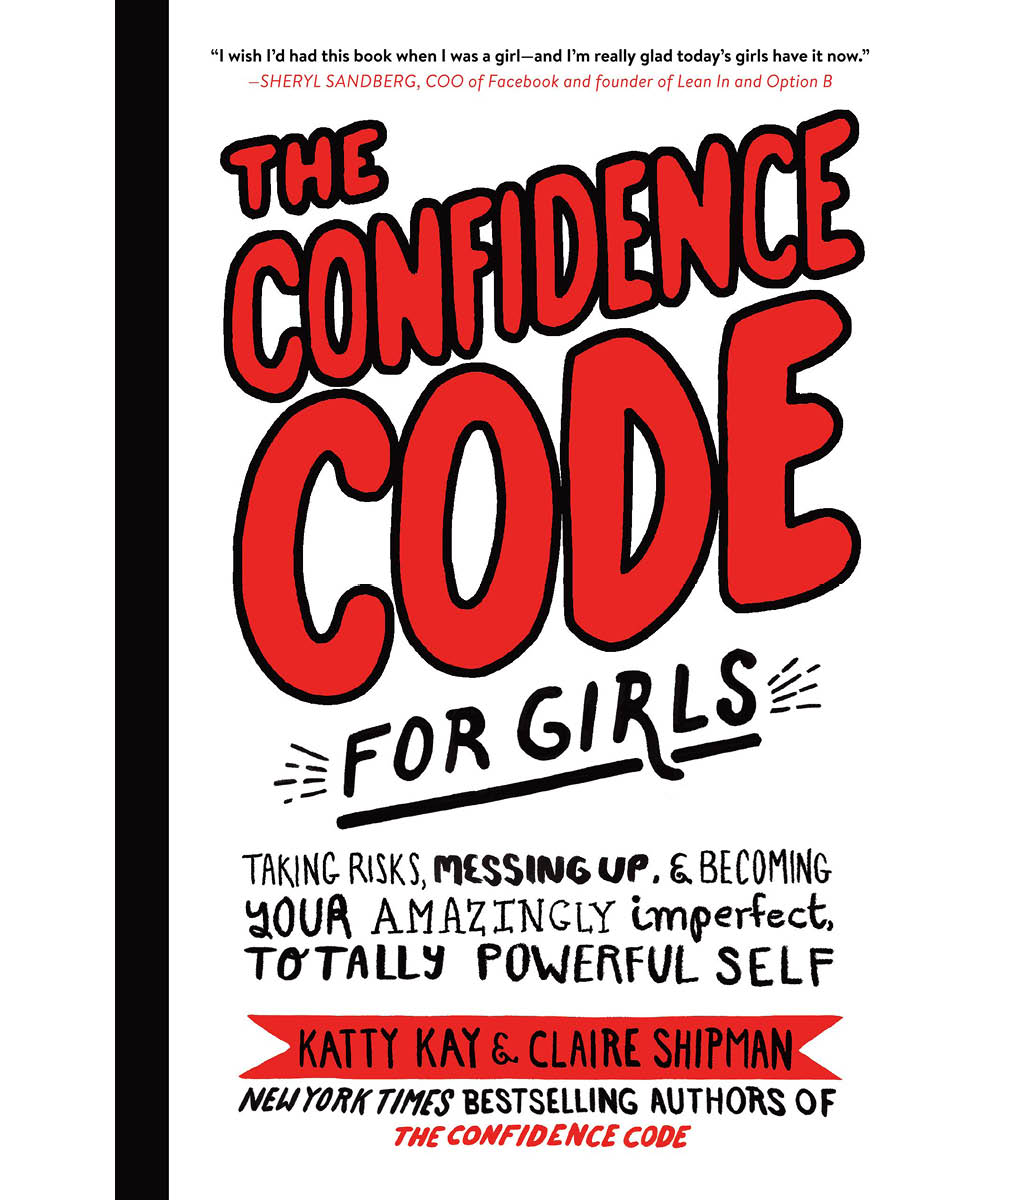 The Confidence Code for Girls by Katty Kay